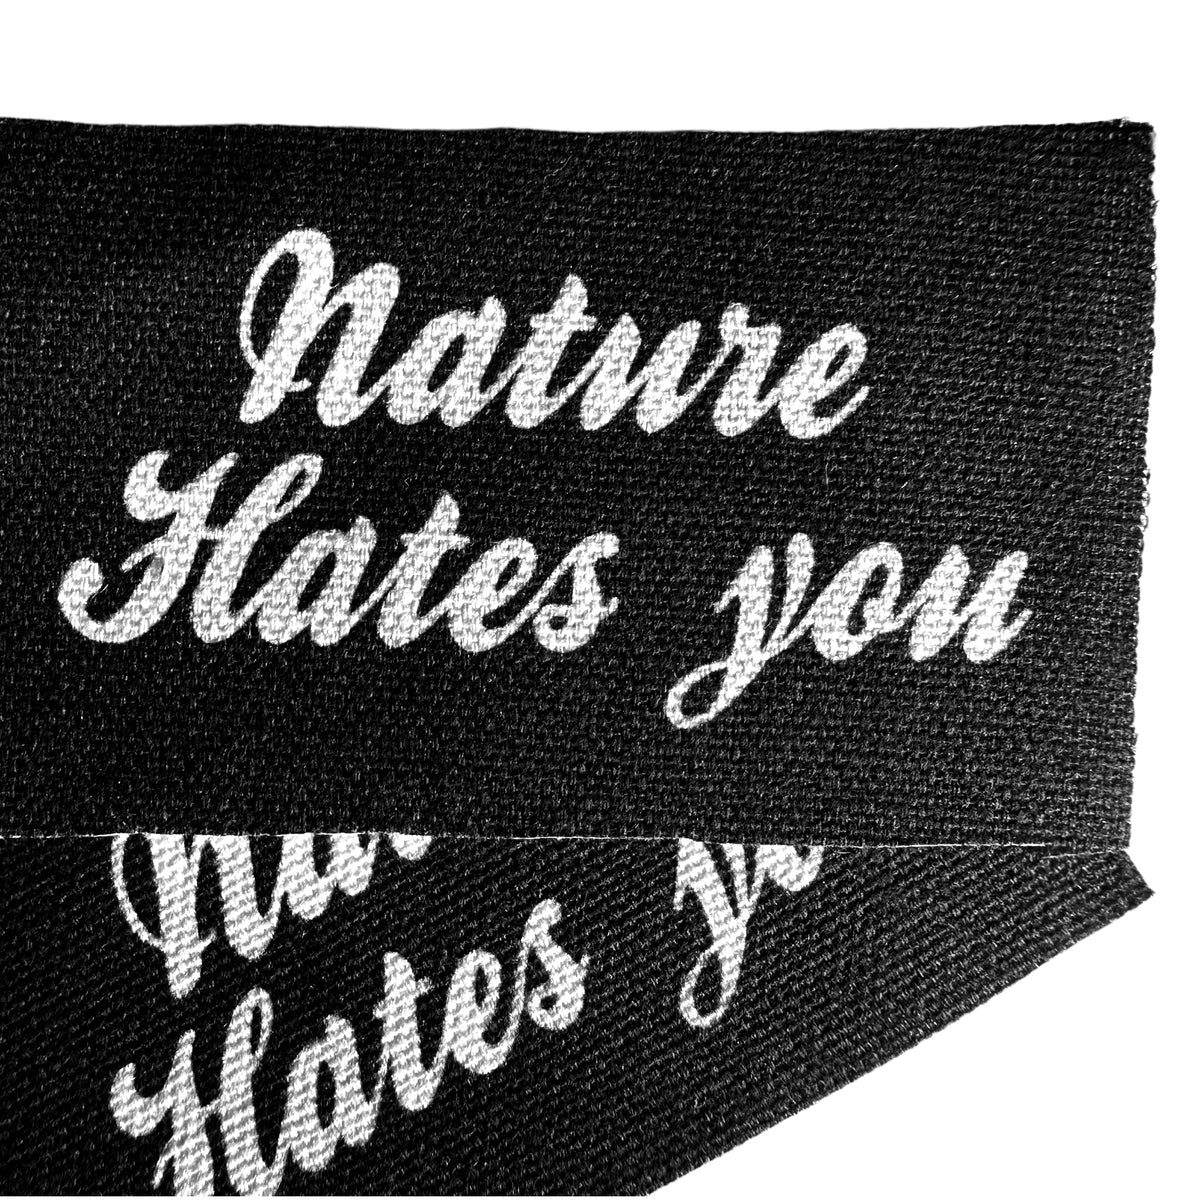 Nature Hates You Sew-On Patch